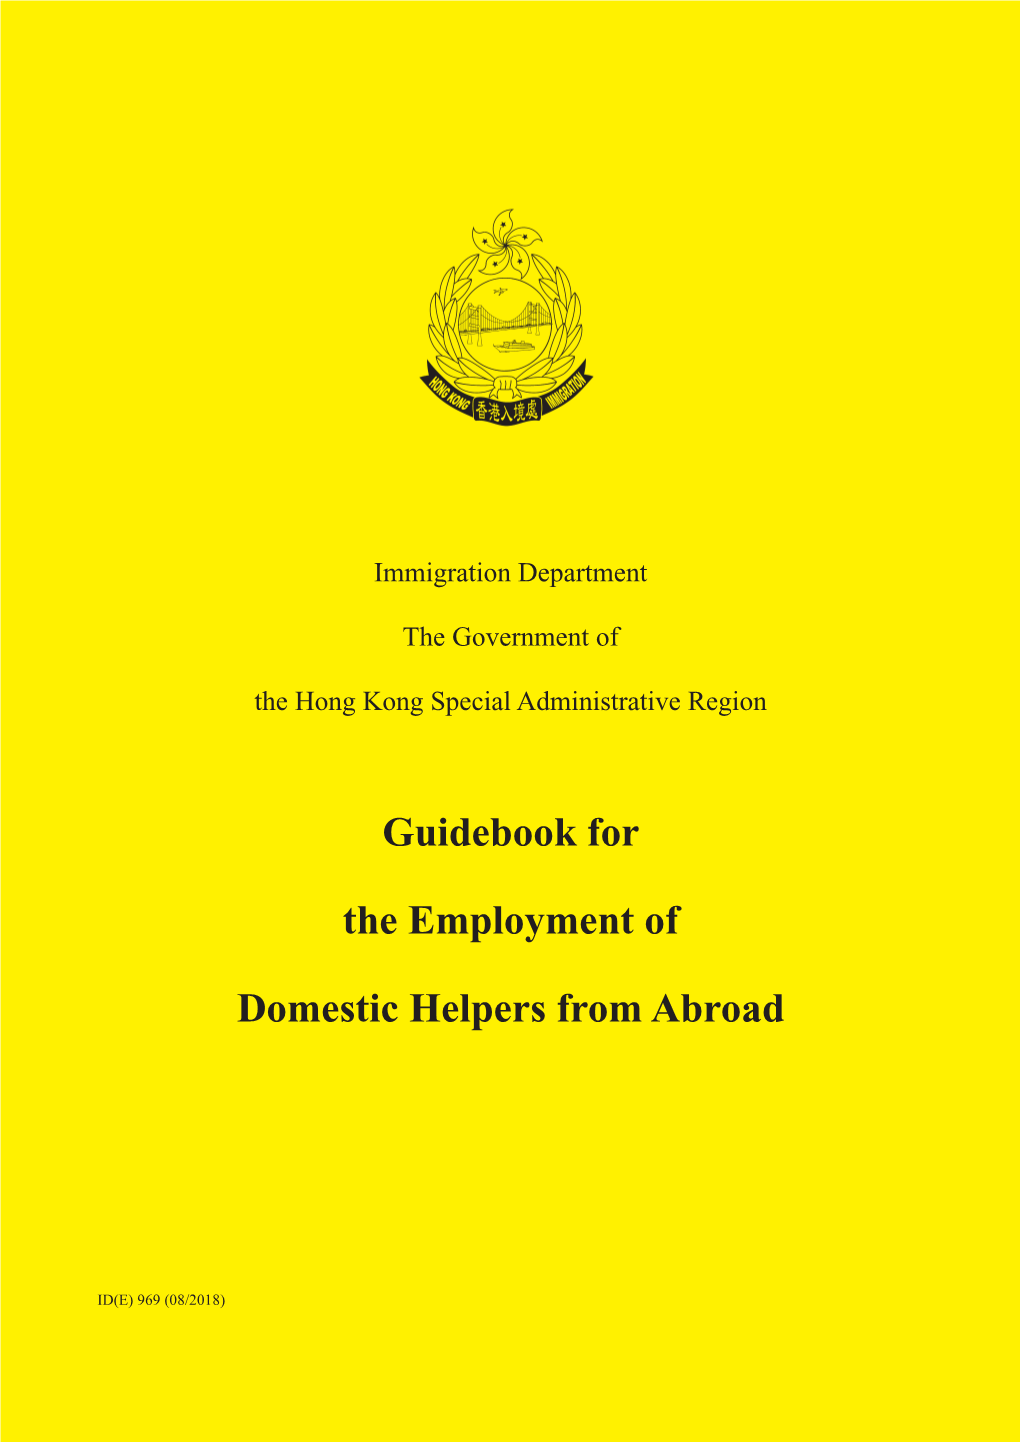 Guidebook for the Employment of Domestic Helpers from Abroad